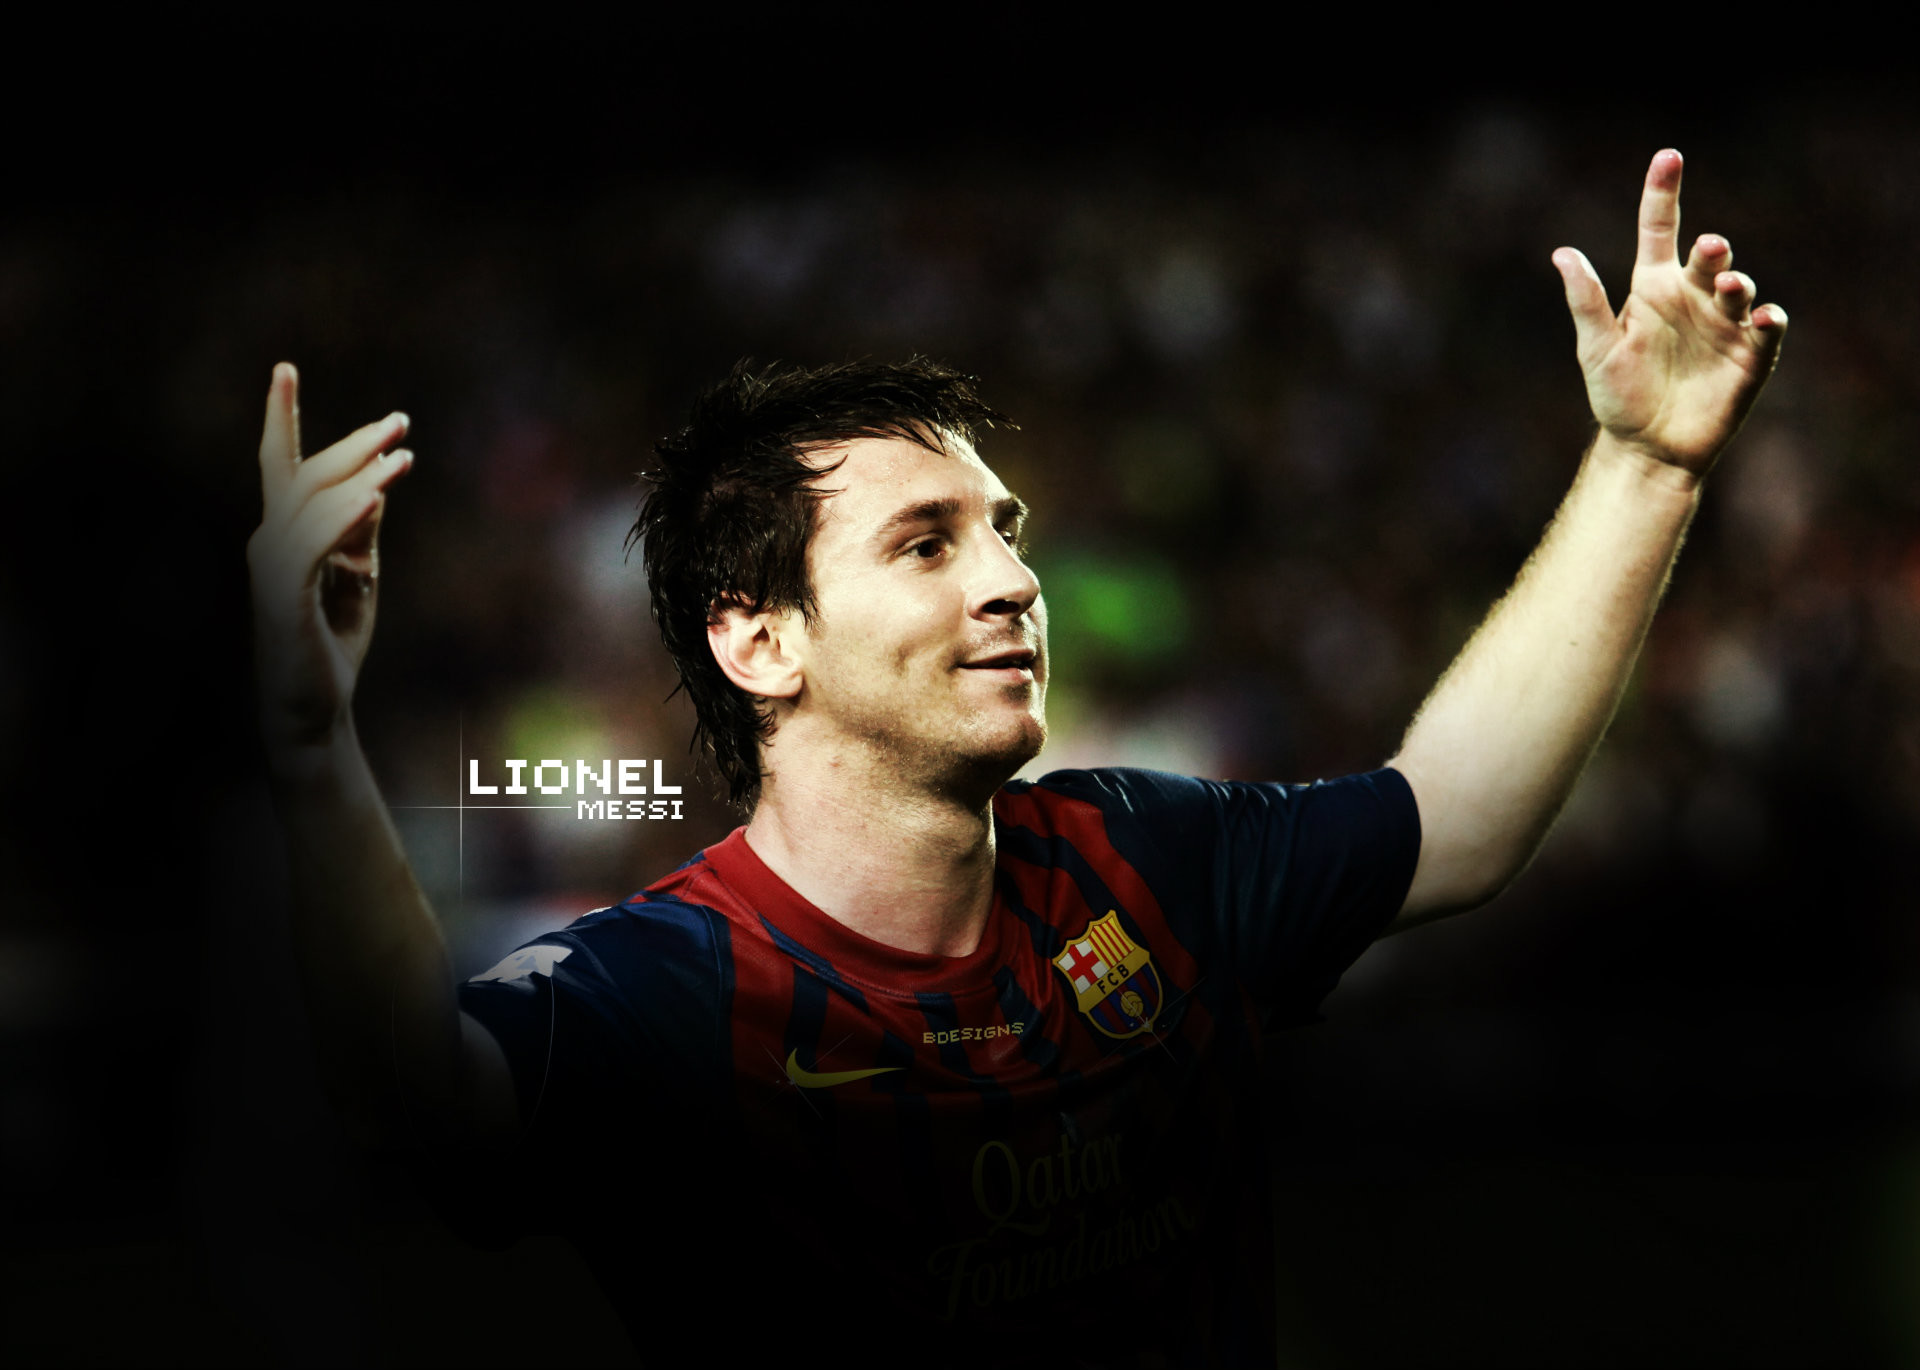 1920x1370 The 25+ best Messi wallpaper 2017 ideas on Pinterest | Messi psg, Messi  2017 and Leonel messi